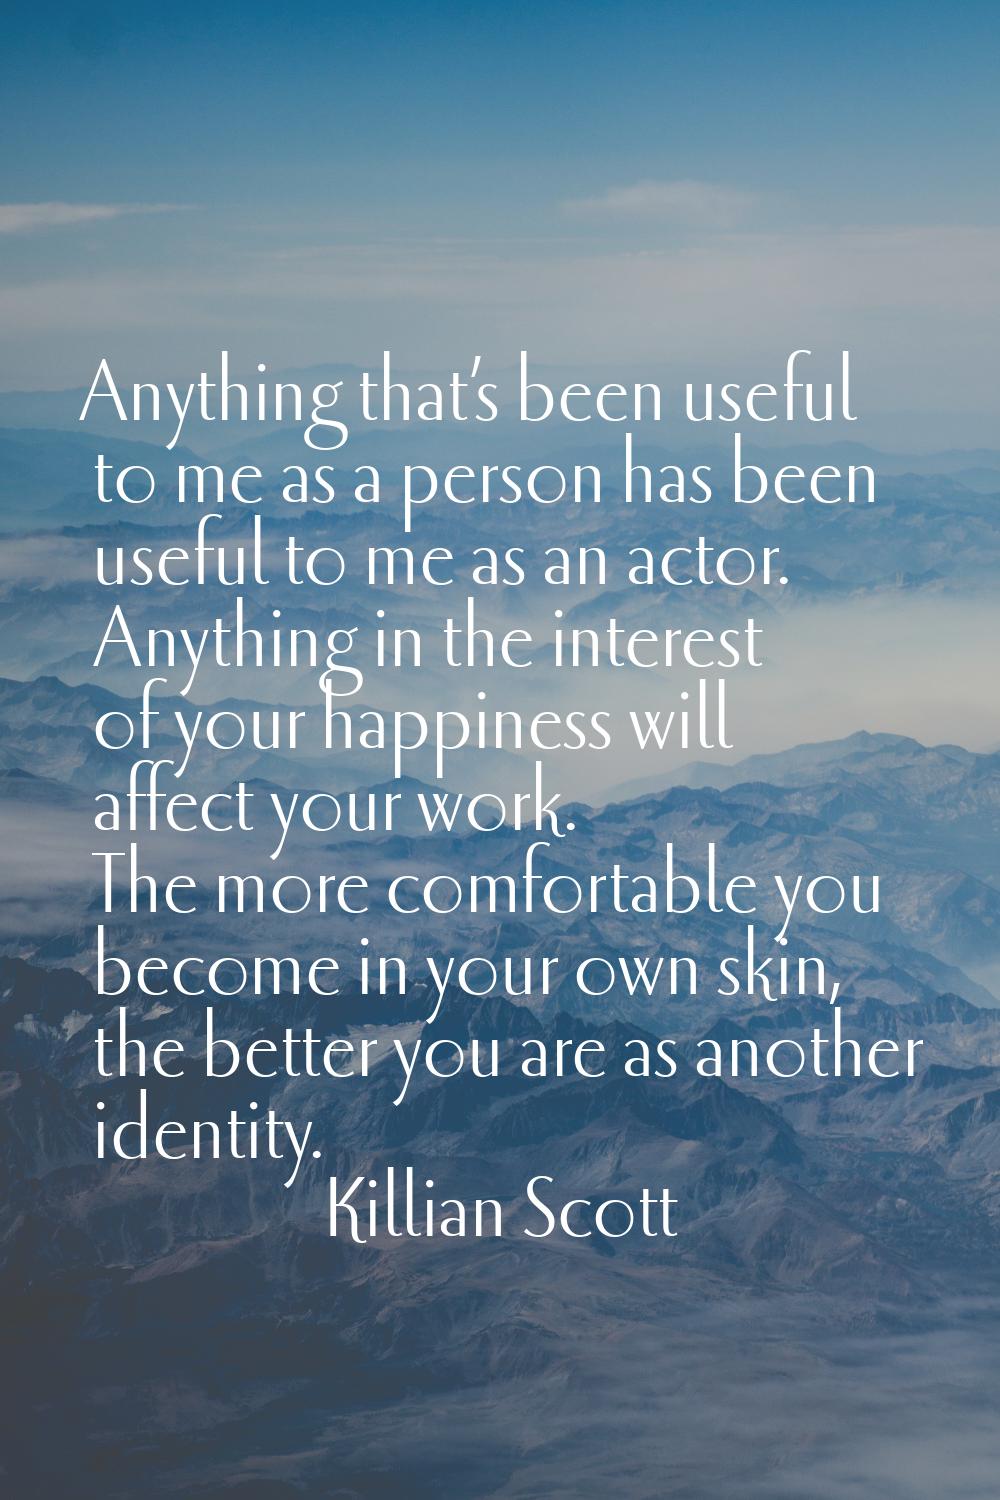 Anything that’s been useful to me as a person has been useful to me as an actor. Anything in the in